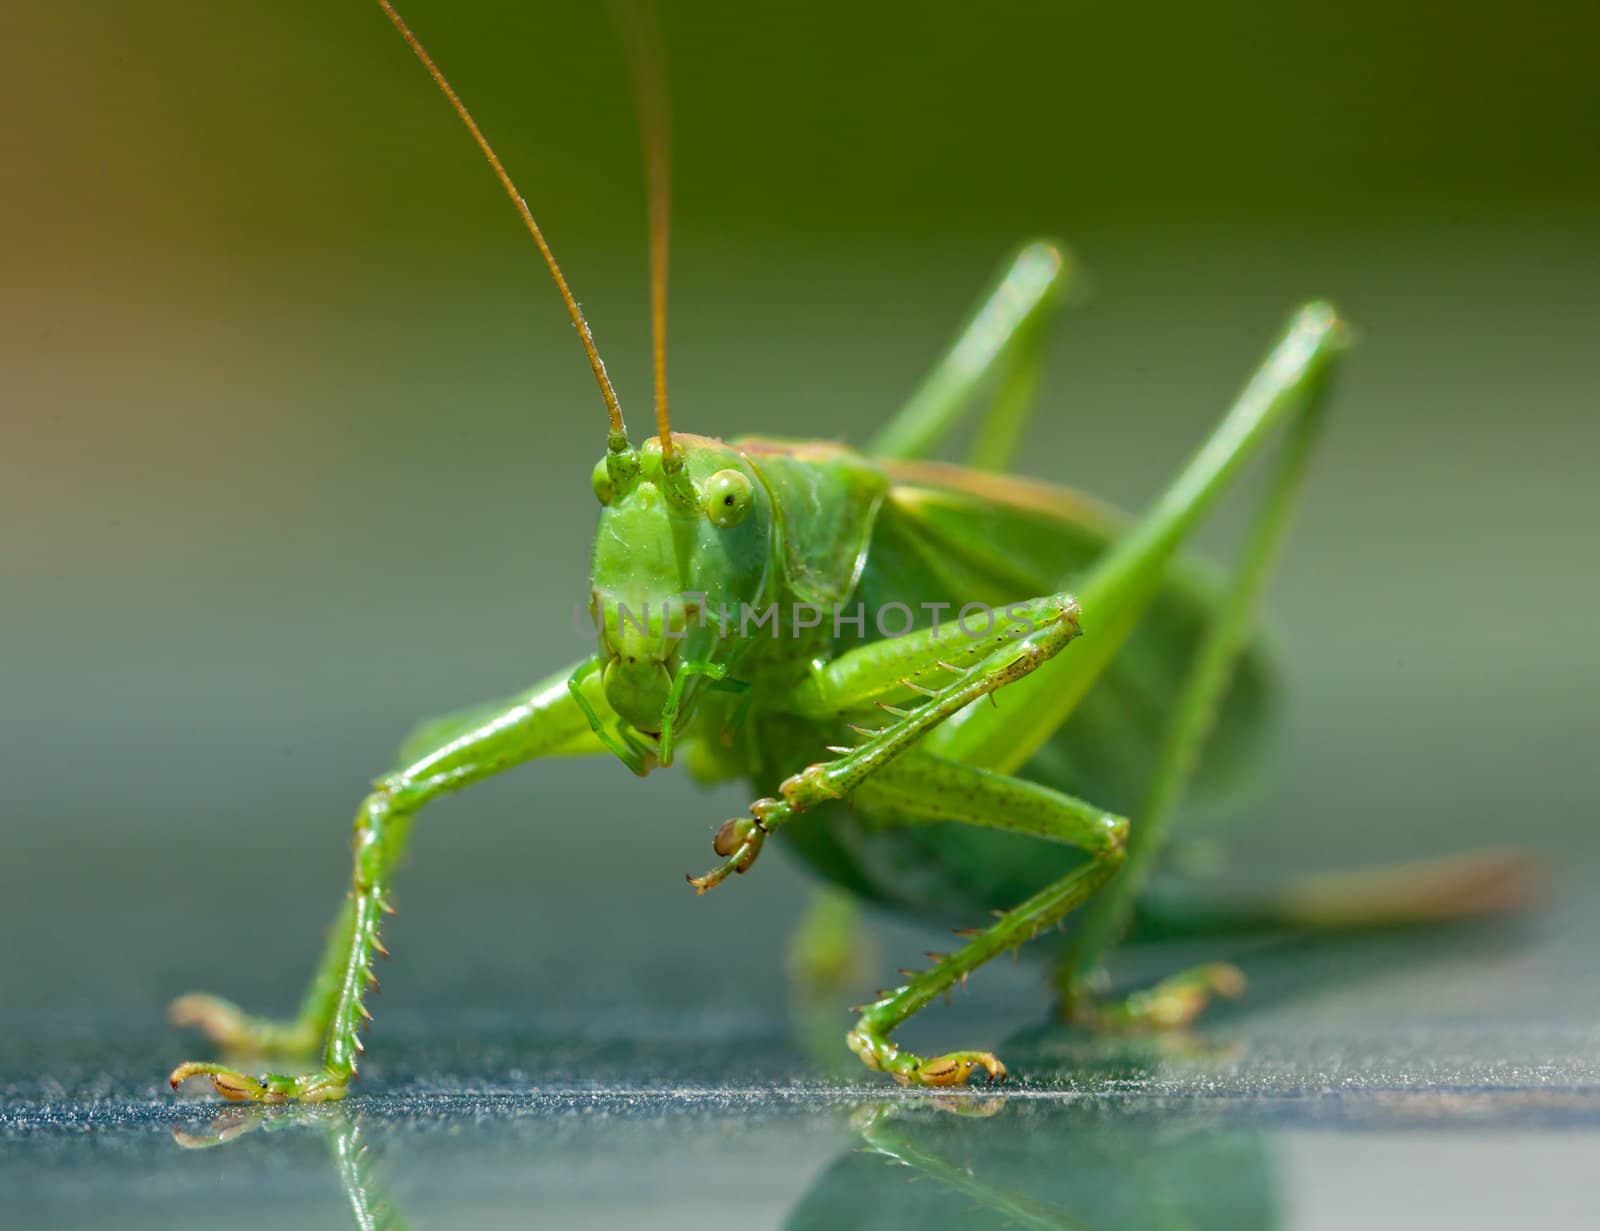 Close-up shot of a grasshopper sitting on a shiny surface